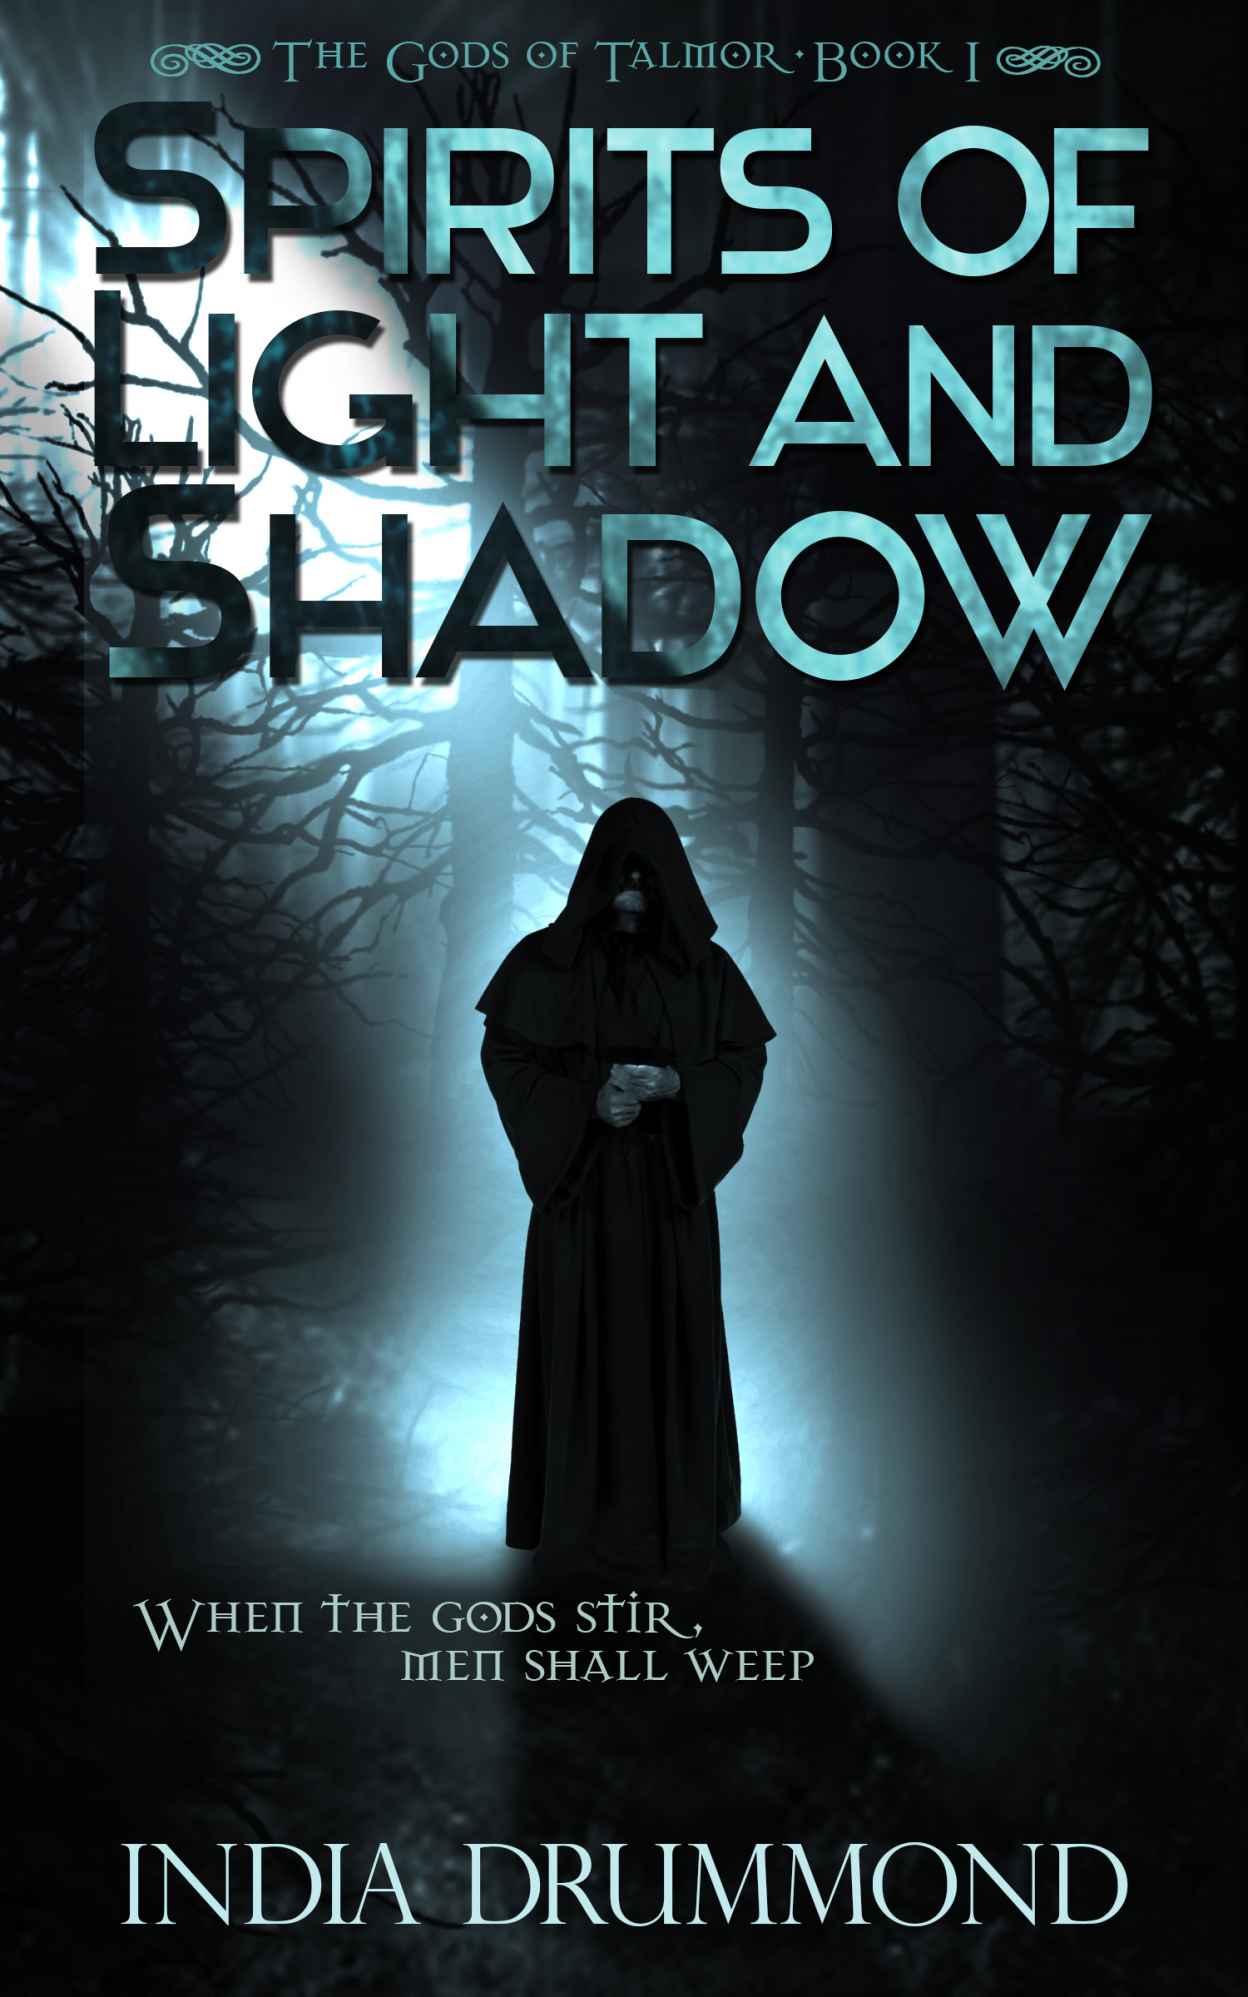 Spirits of Light and Shadow (The Gods of Talmor) by India Drummond